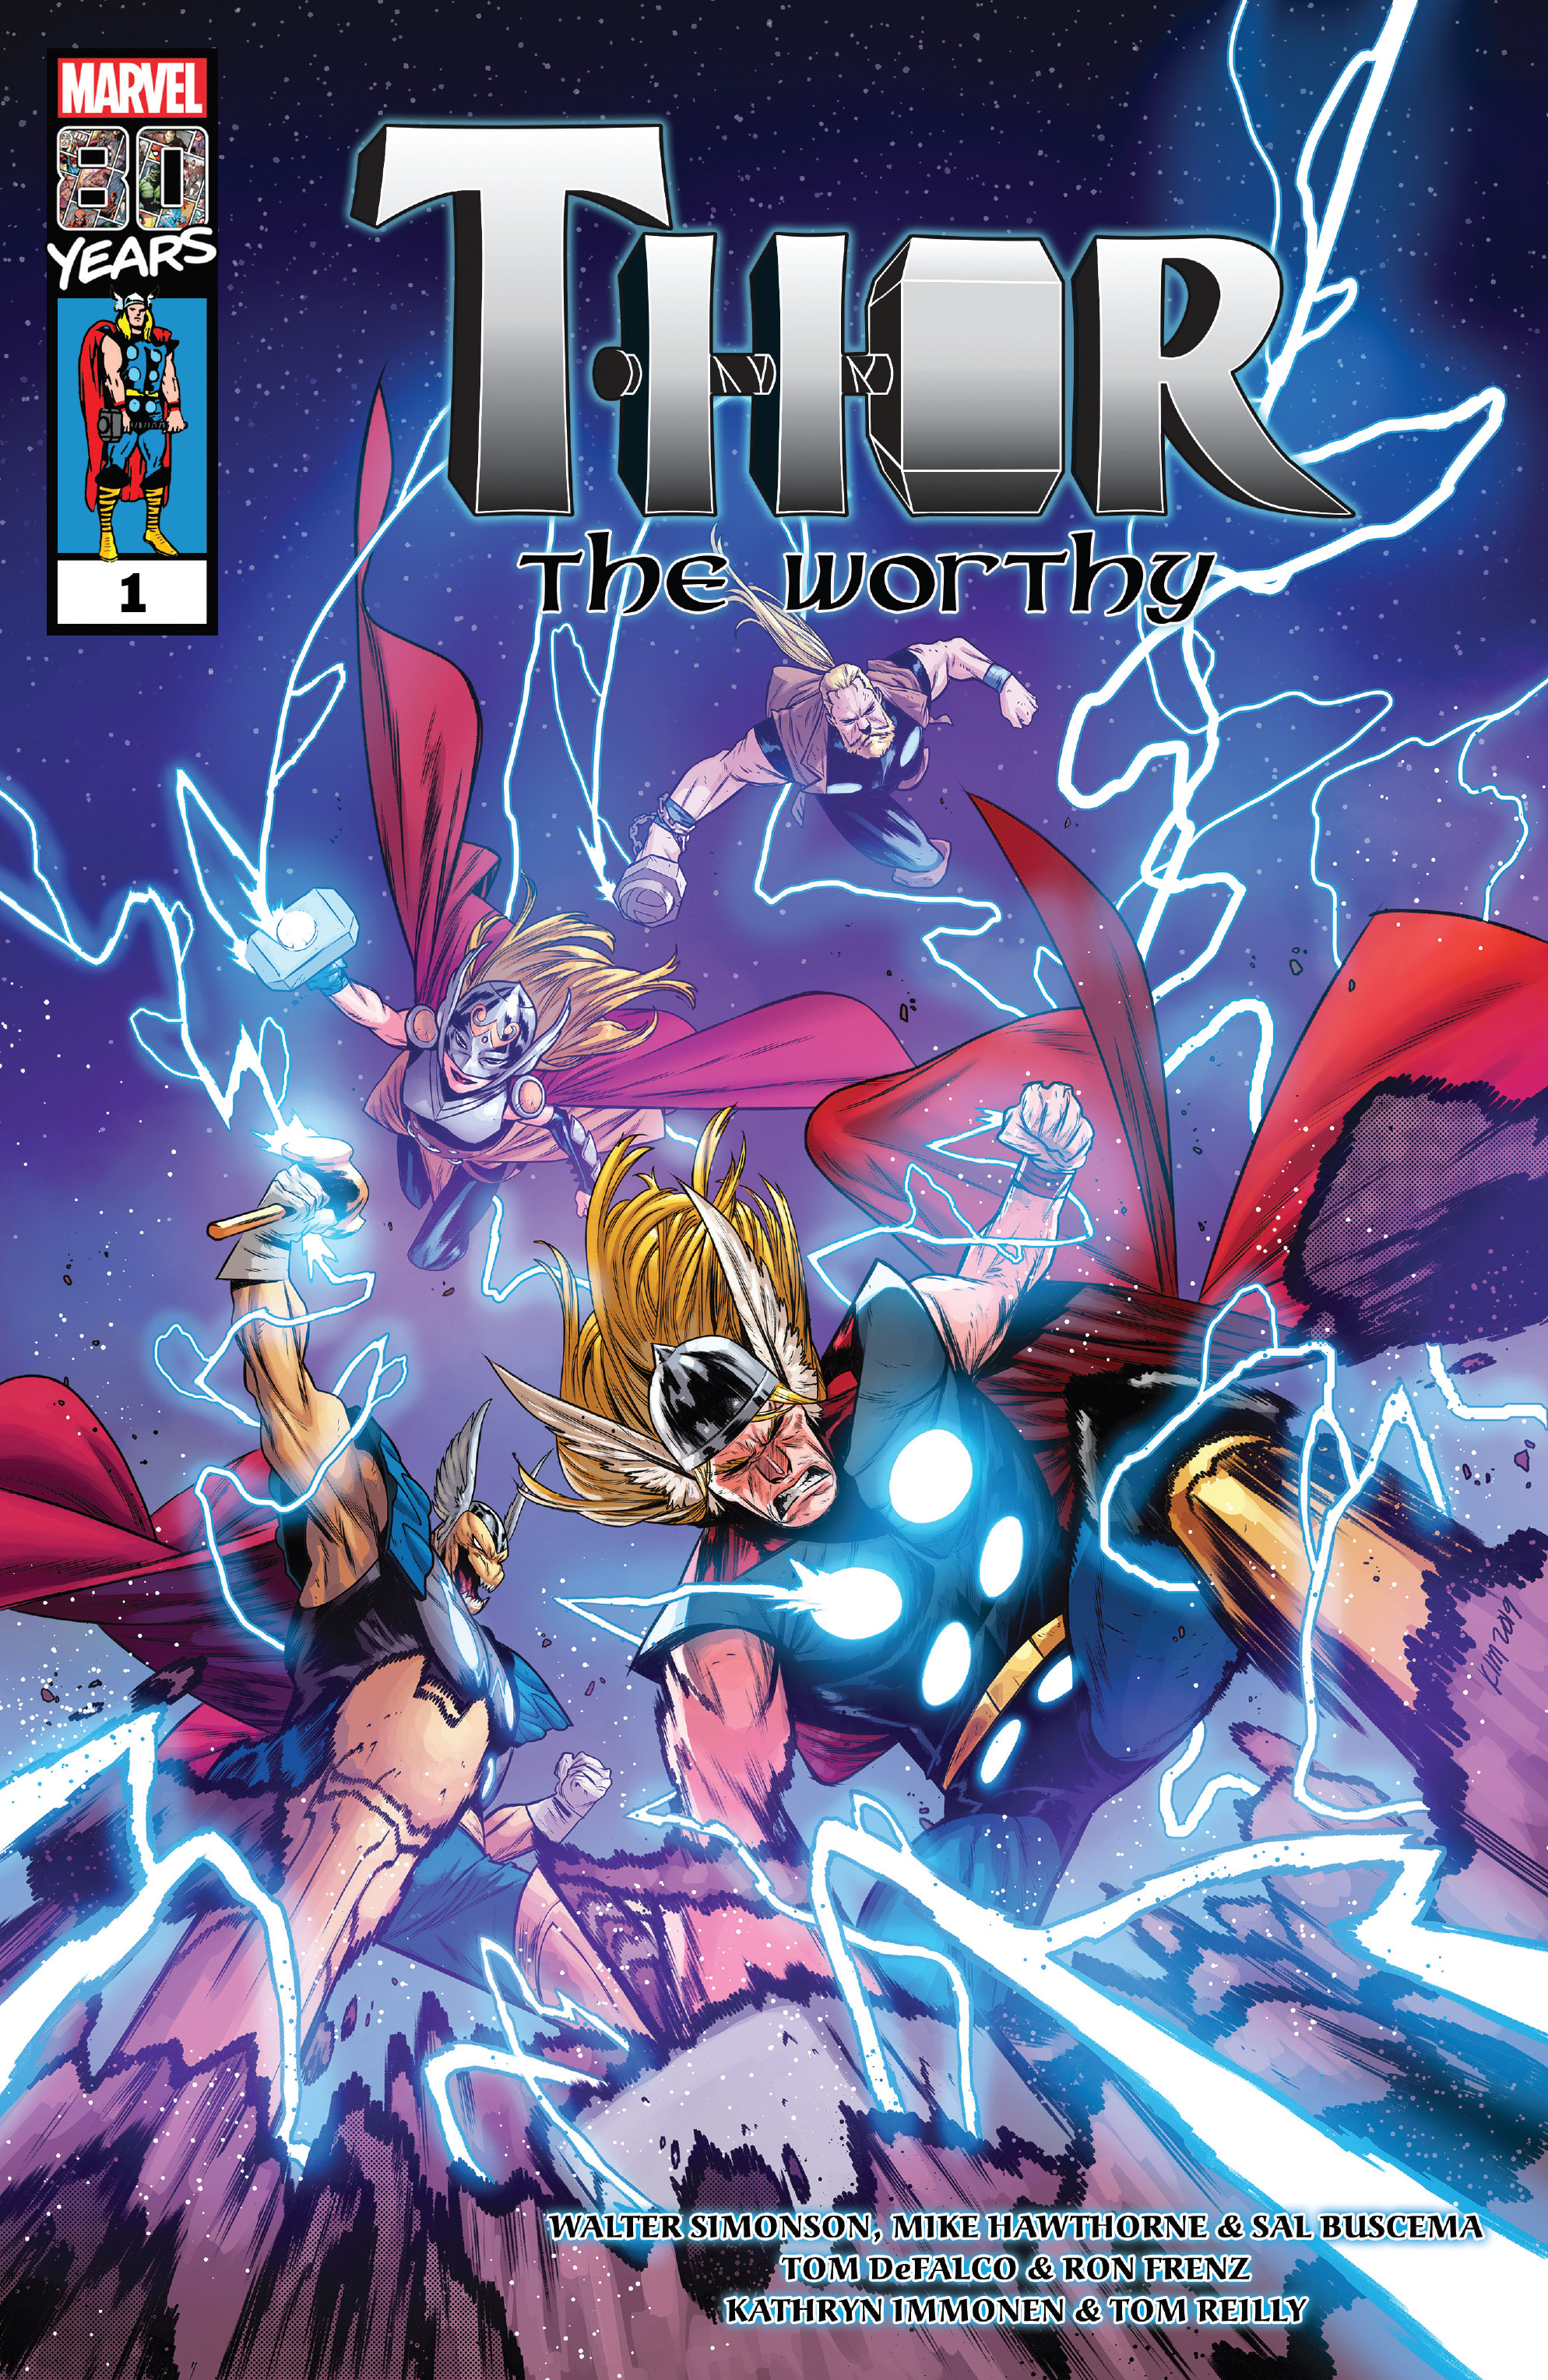 Read online Thor: The Worthy comic -  Issue # Full - 1